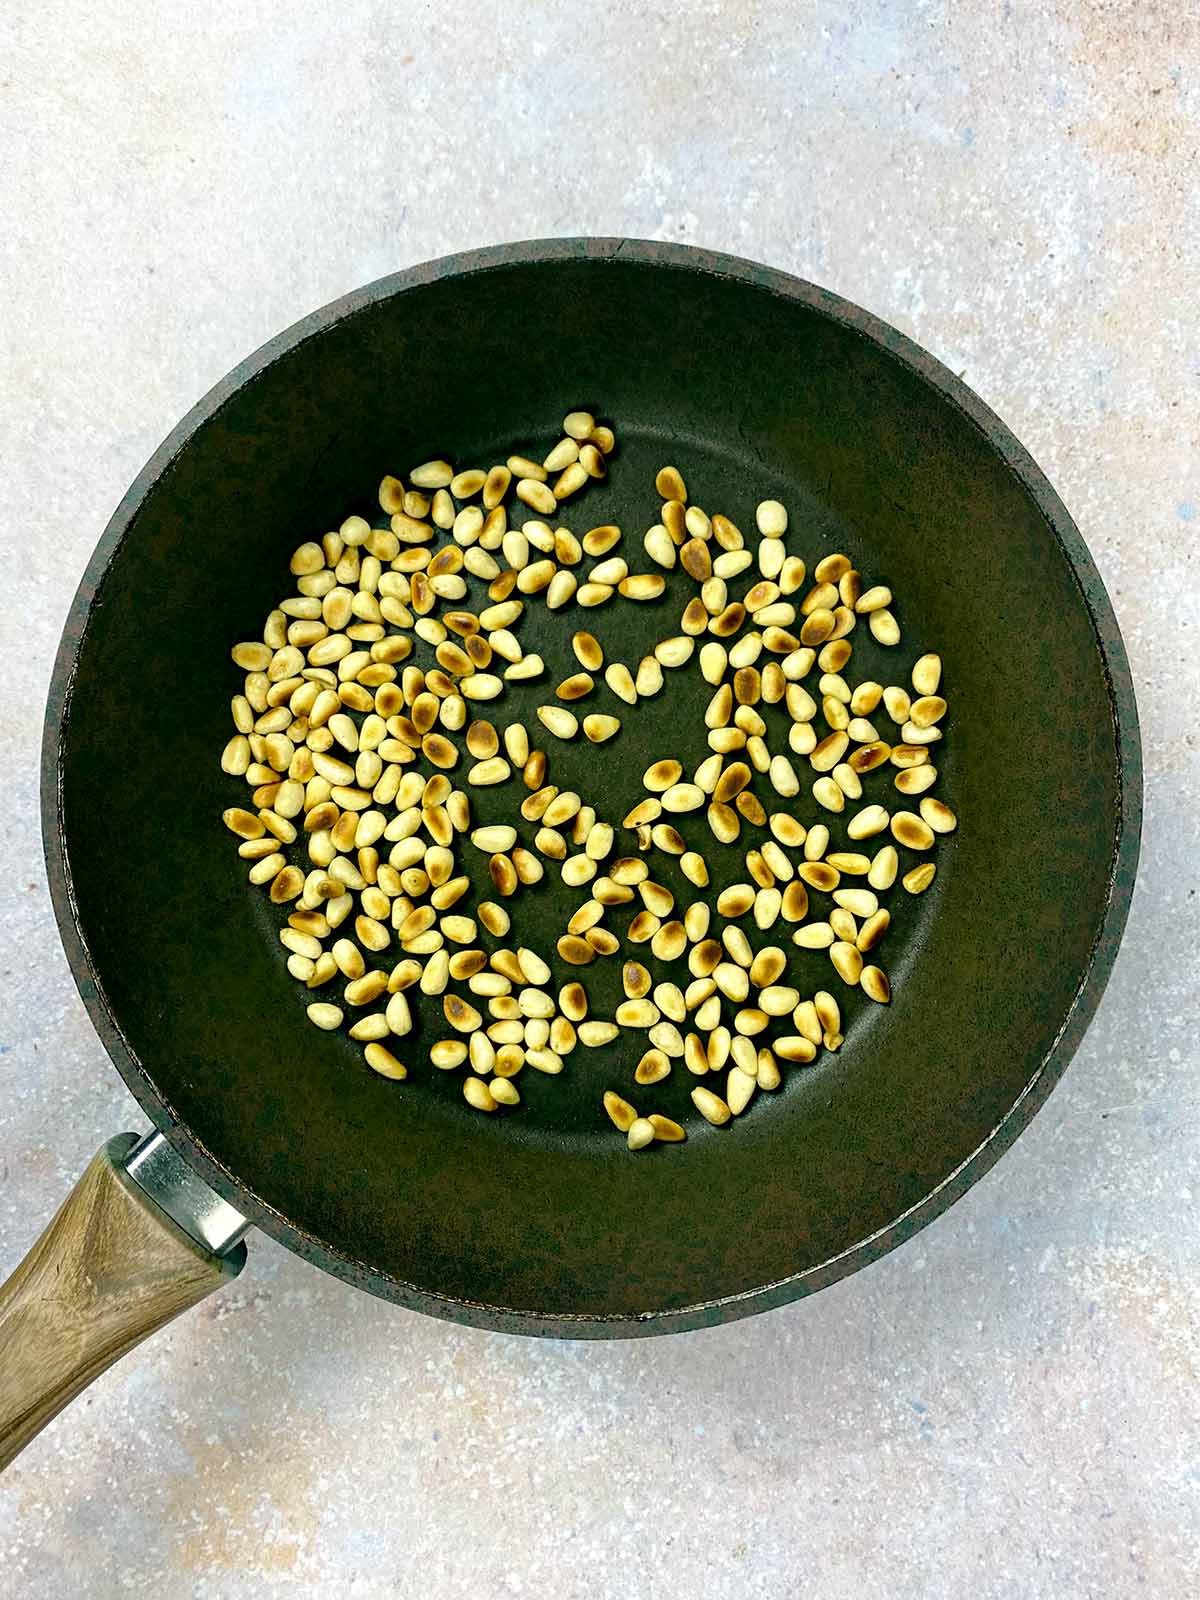 Pine nuts toasting in a frying pan.